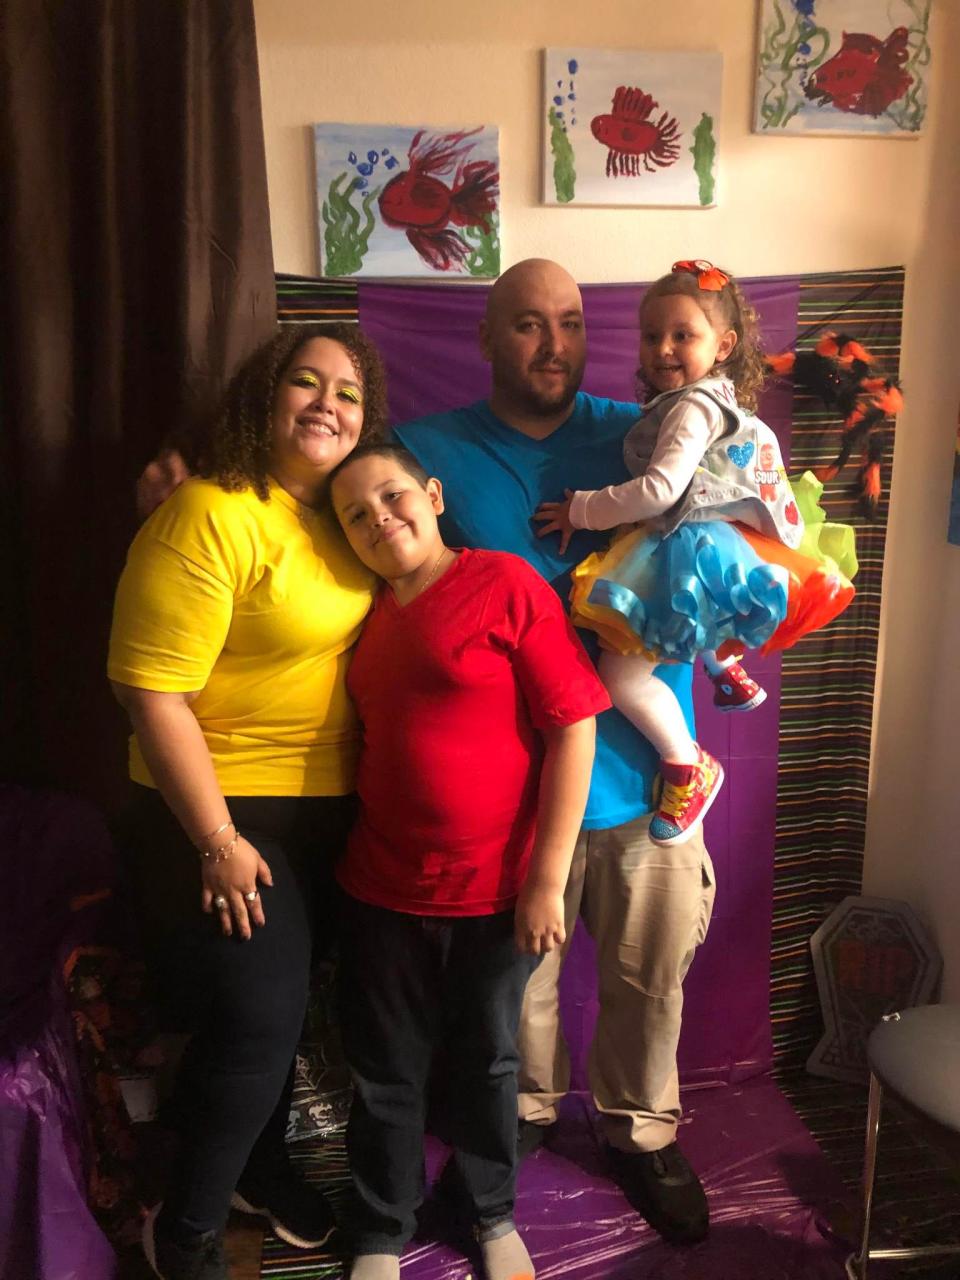 Andrew Benavente with his fiancé Digna and their children.